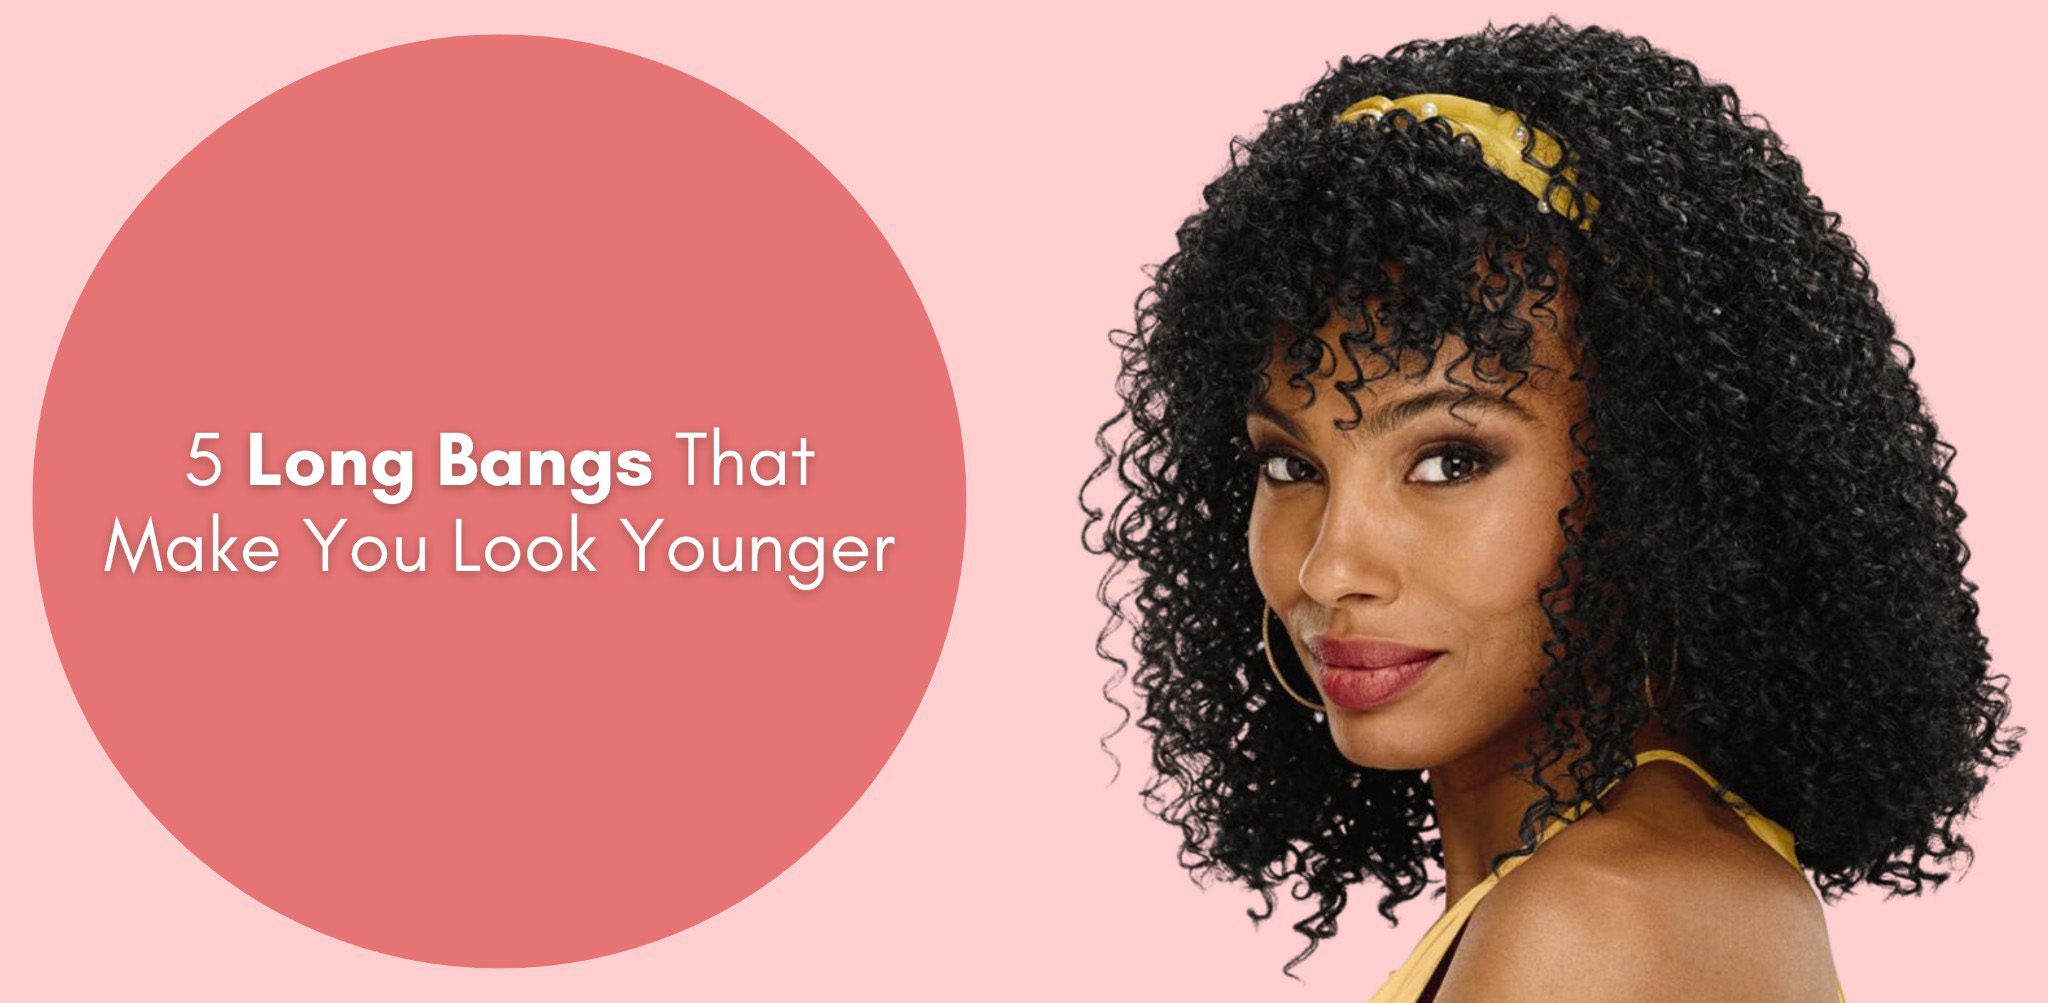 5 long bangs that make you look younger